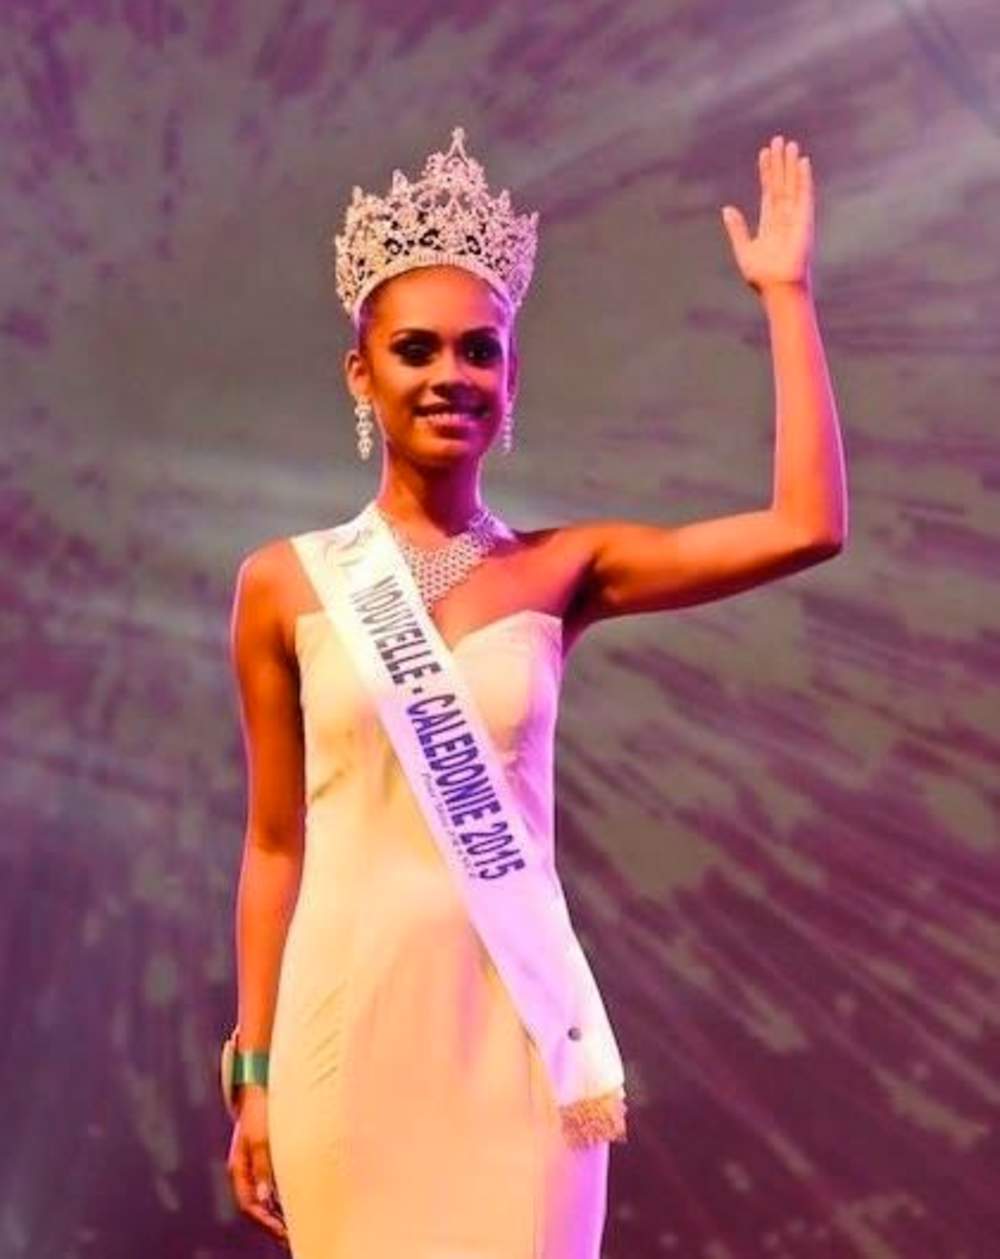 Gyna Moereo, Miss Nouvelle-Calédonie 2015